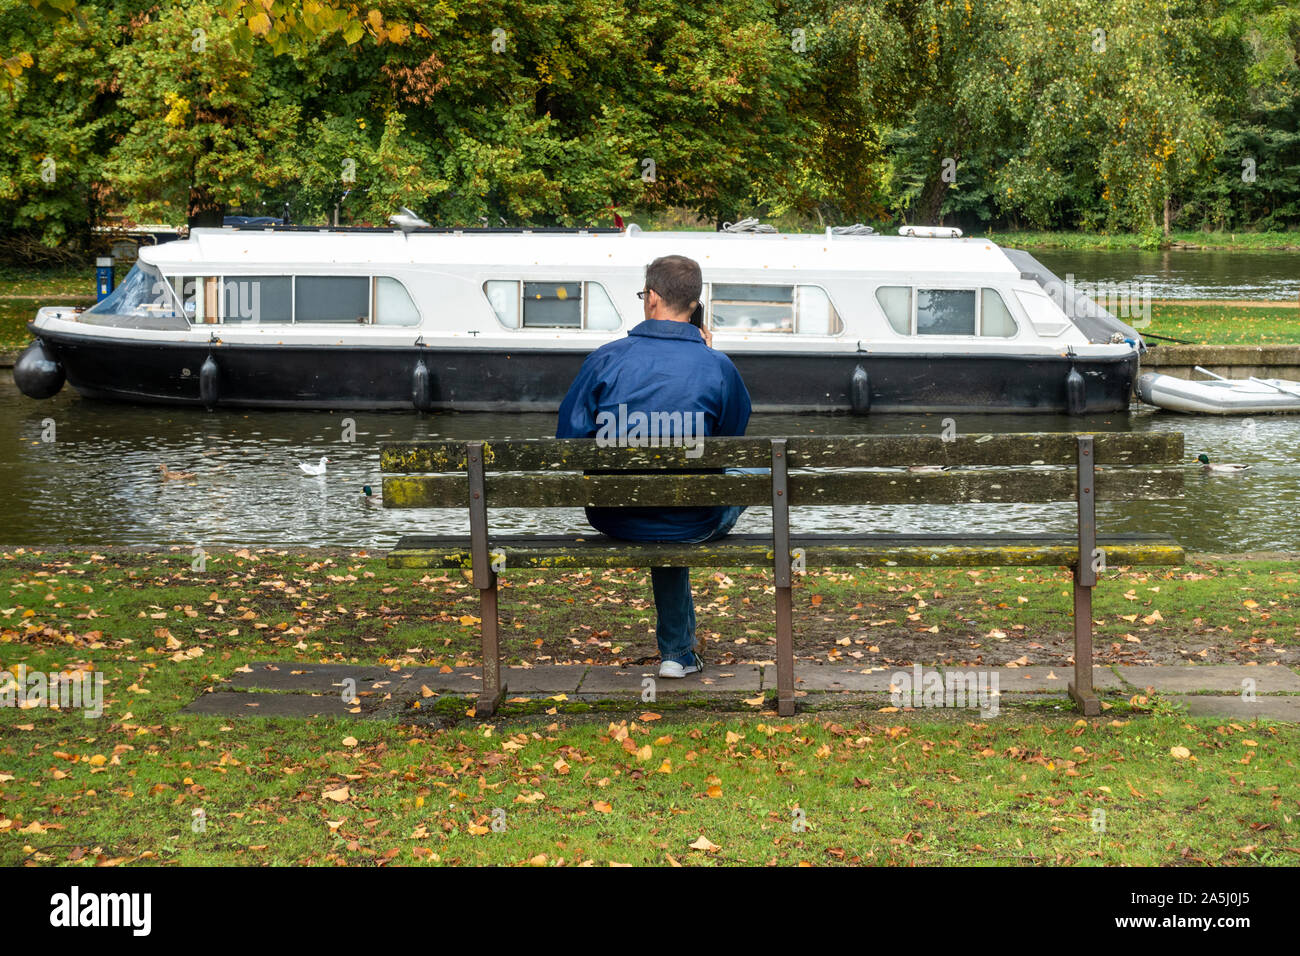 A man sits on a wooden bench next to The River Thames at Windsor while making a telephone call. Stock Photo